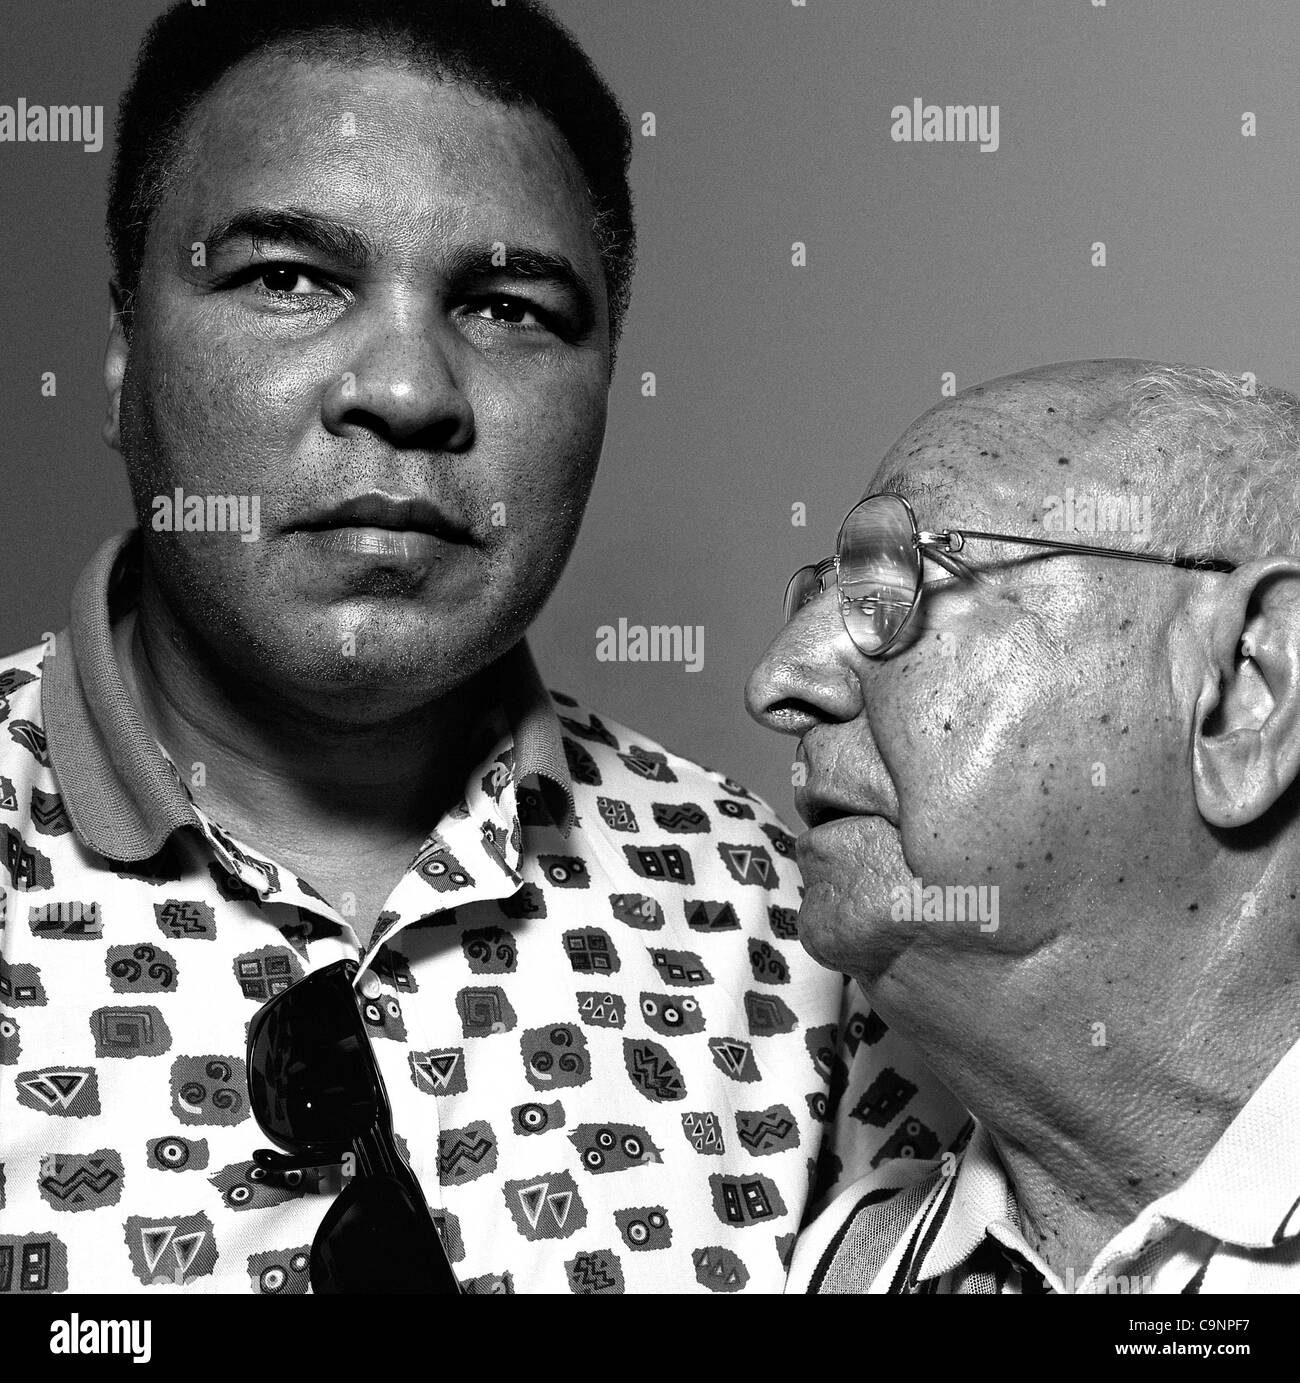 Feb 1, 2012 - Tampa, Florida, U.S. -  Renowned boxing trainer ANGLEO DUNDEE has died at the age of 90. Dundee, who helped train Muhammad Ali and Sugar Ray Leonard, passed away in Tampa. Pictured with MUHAMMAD ALI in March 1998 in South Florida. (Credit Image: © David Jacobs/ZUMA Press) Stock Photo